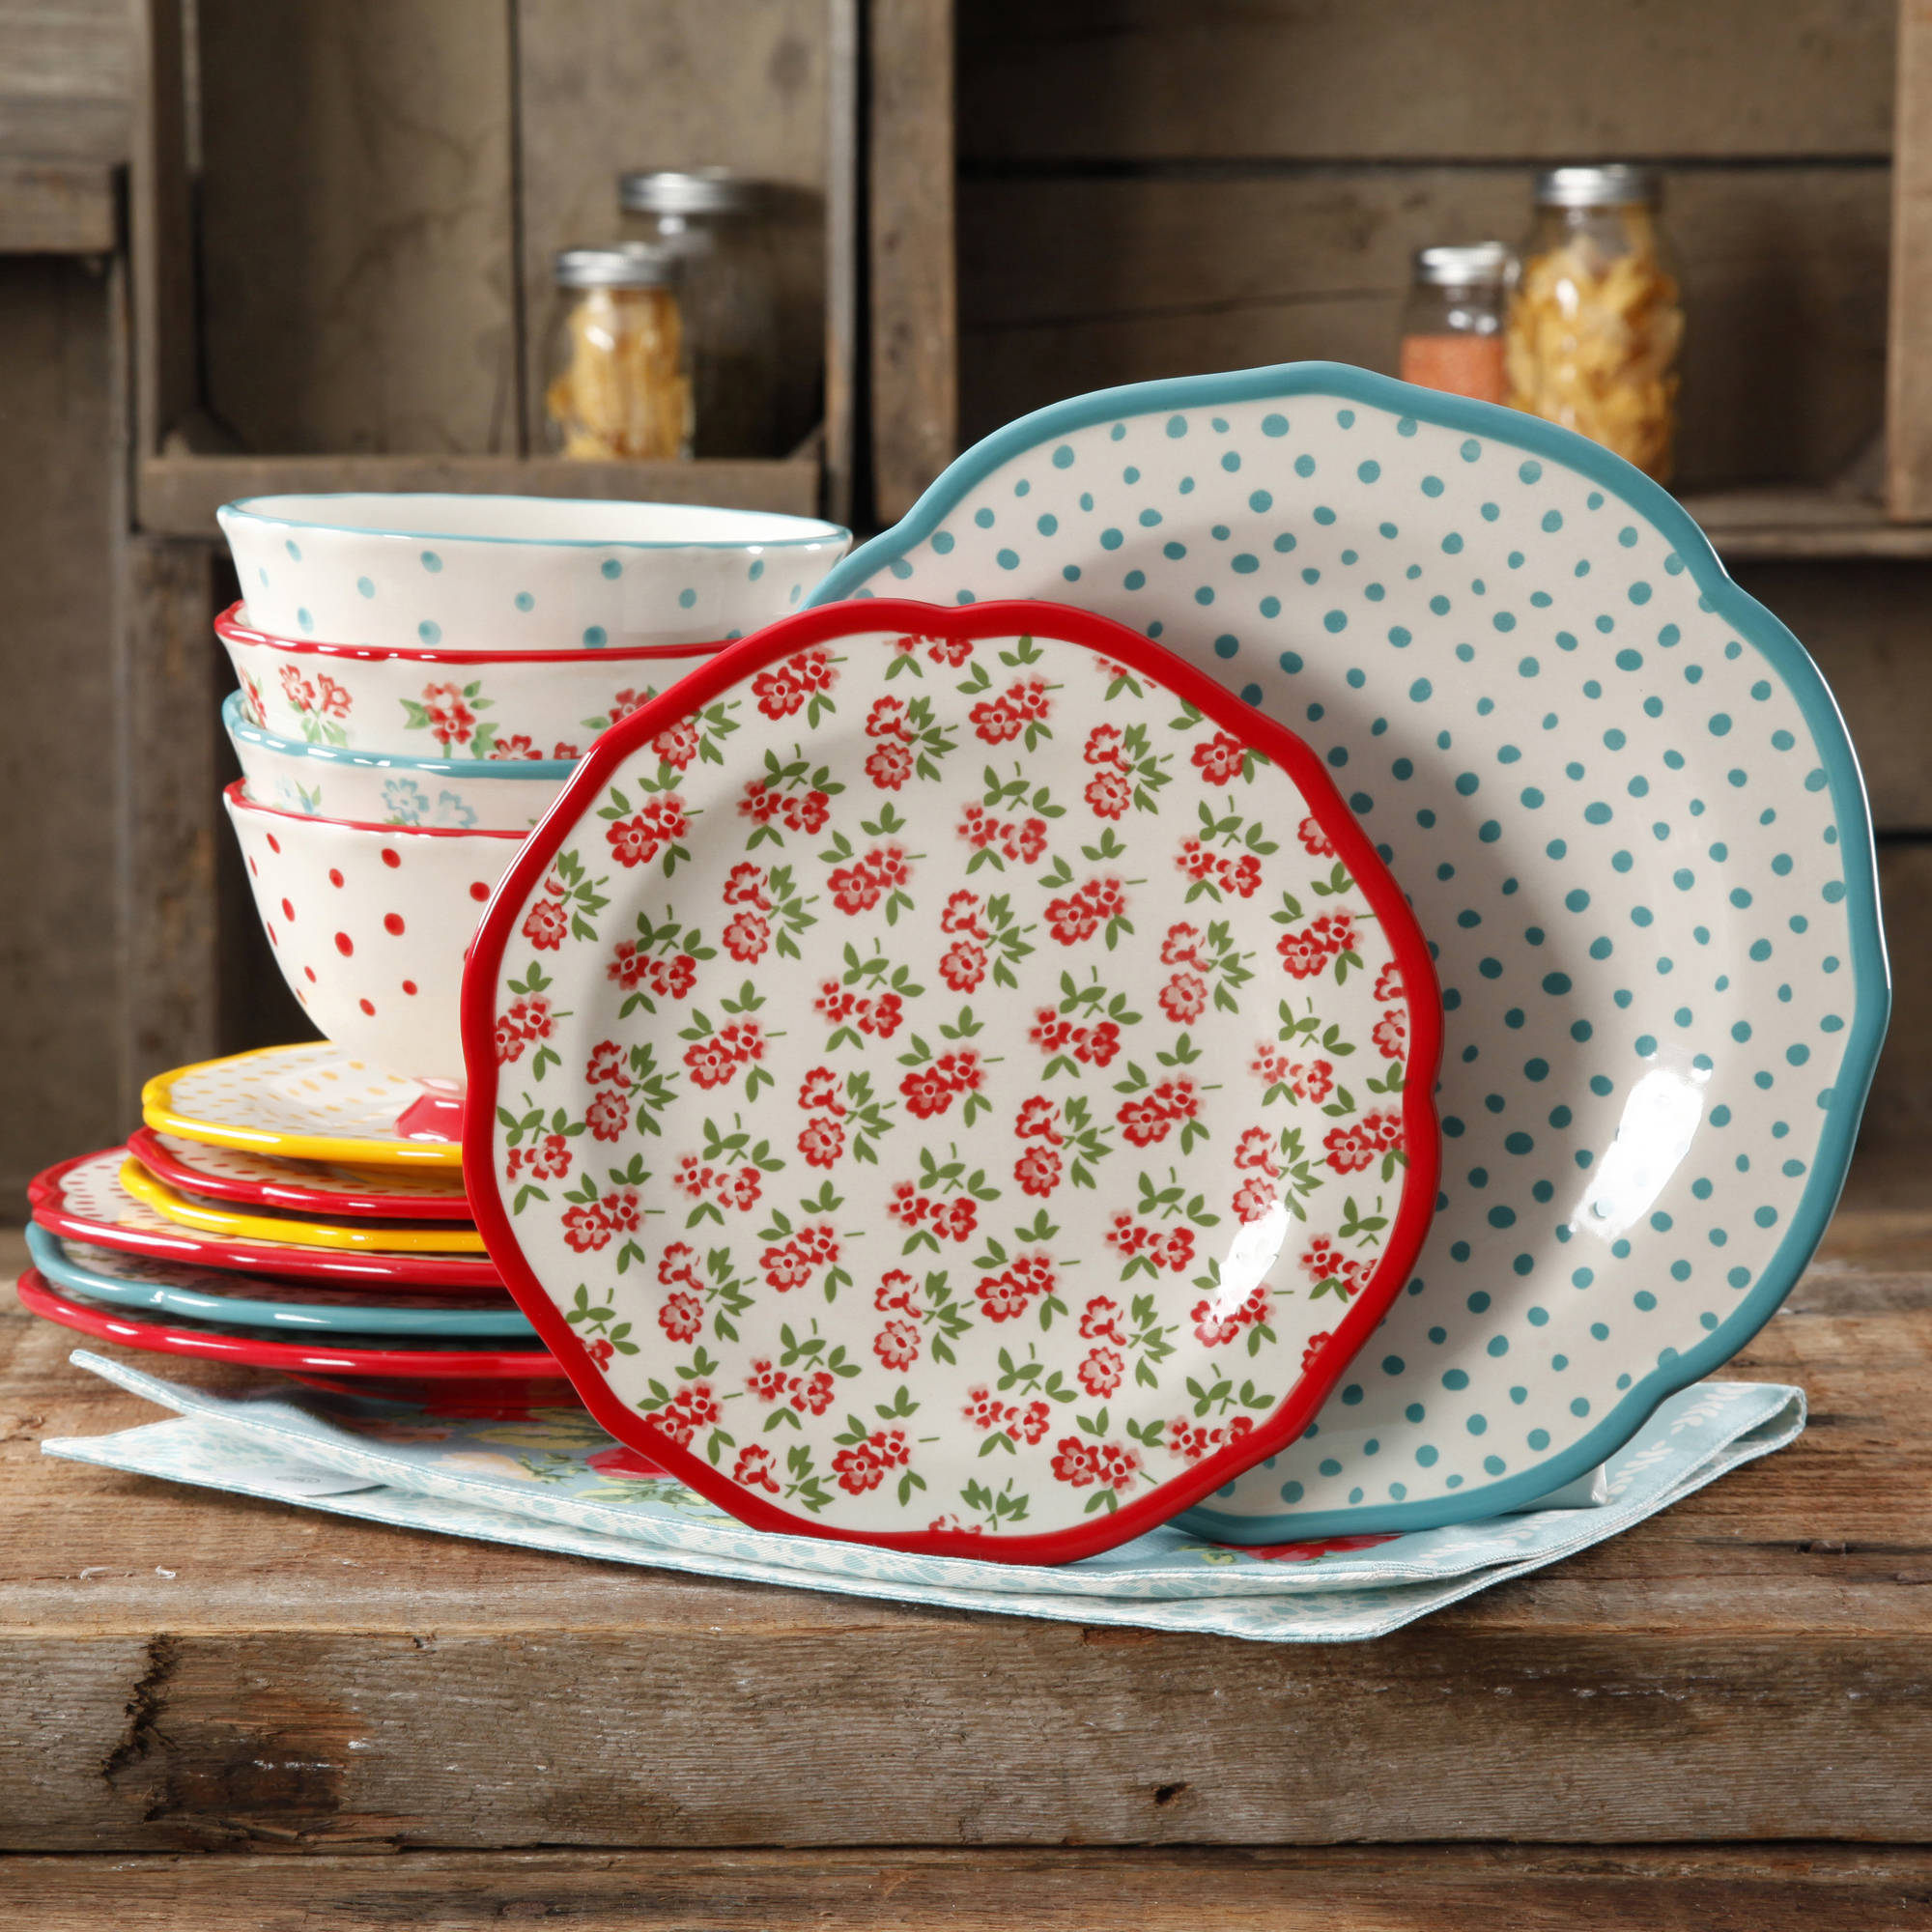 Pioneer Woman kitchenware is on sale for Labor Day